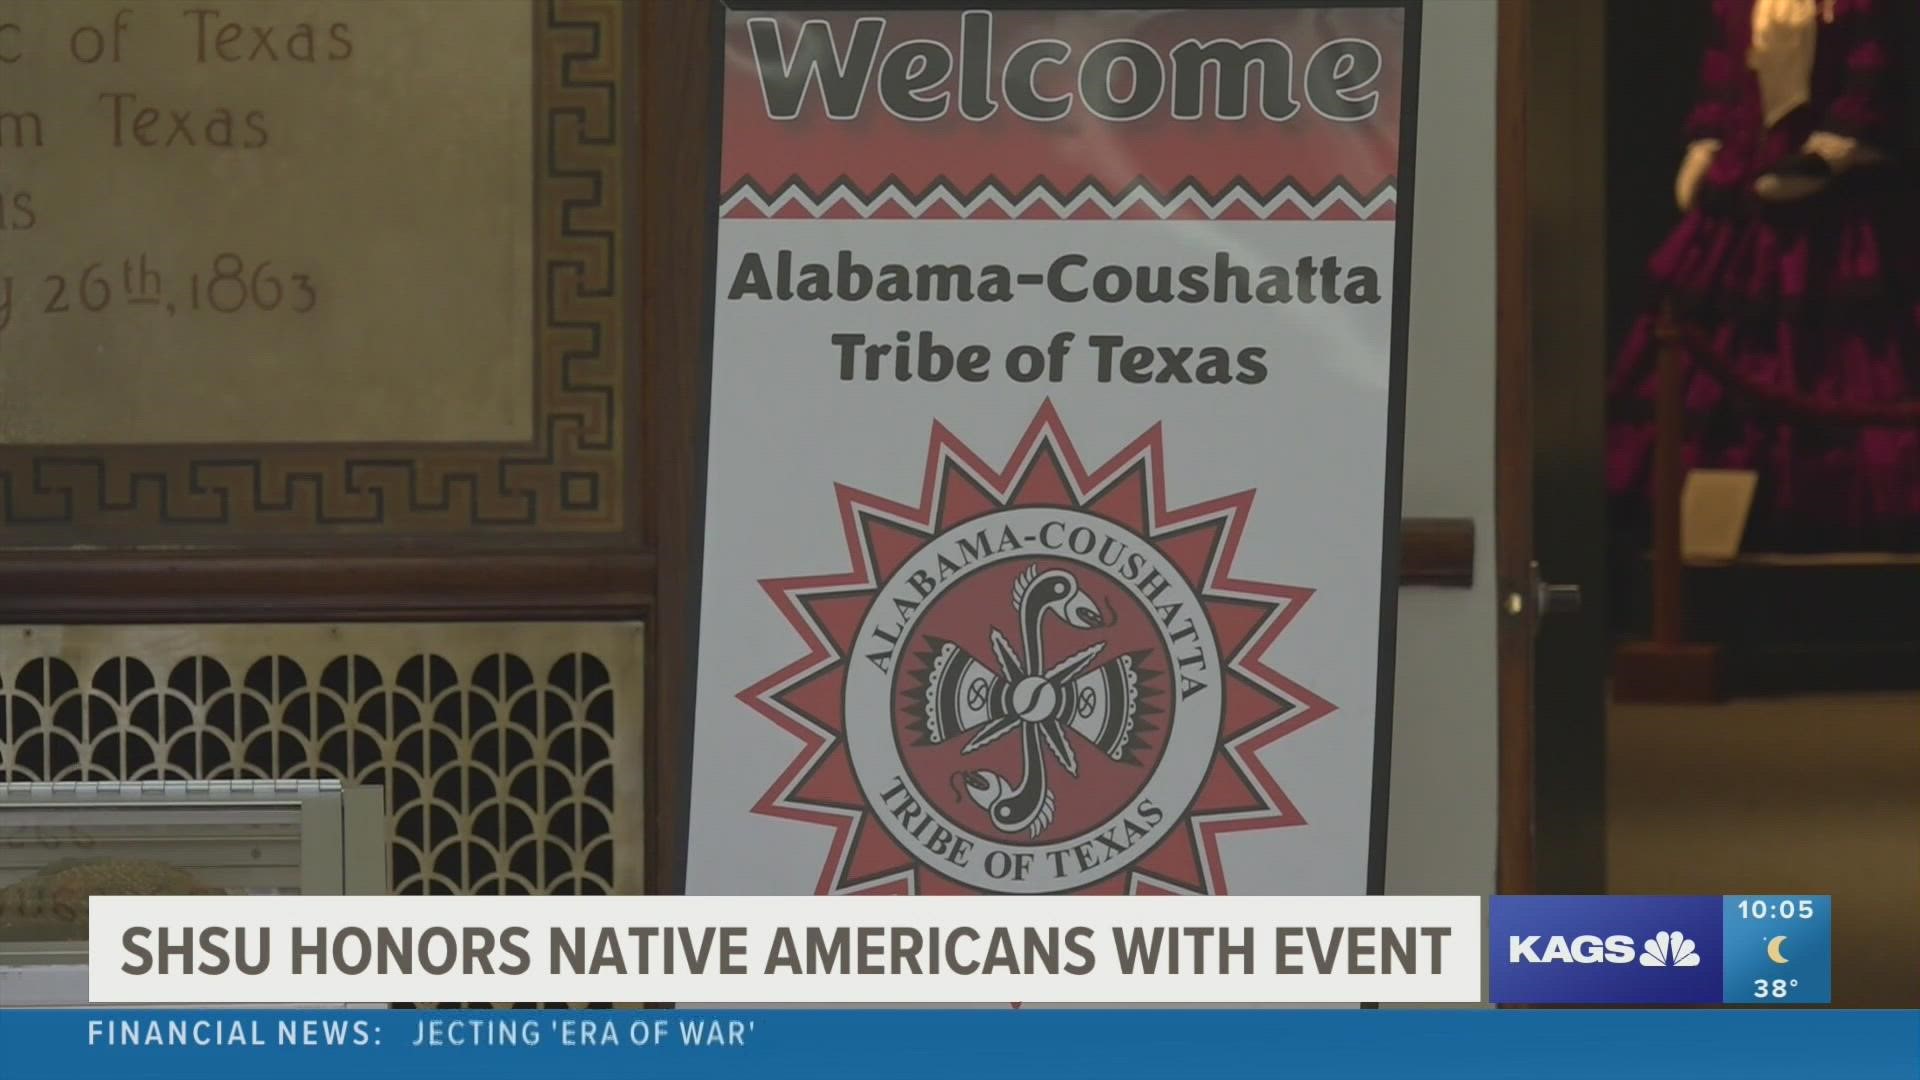 The Sam Houston Memorial Museum honored the tribe during Native American Heritage Month by putting many aspects of their culture on display.